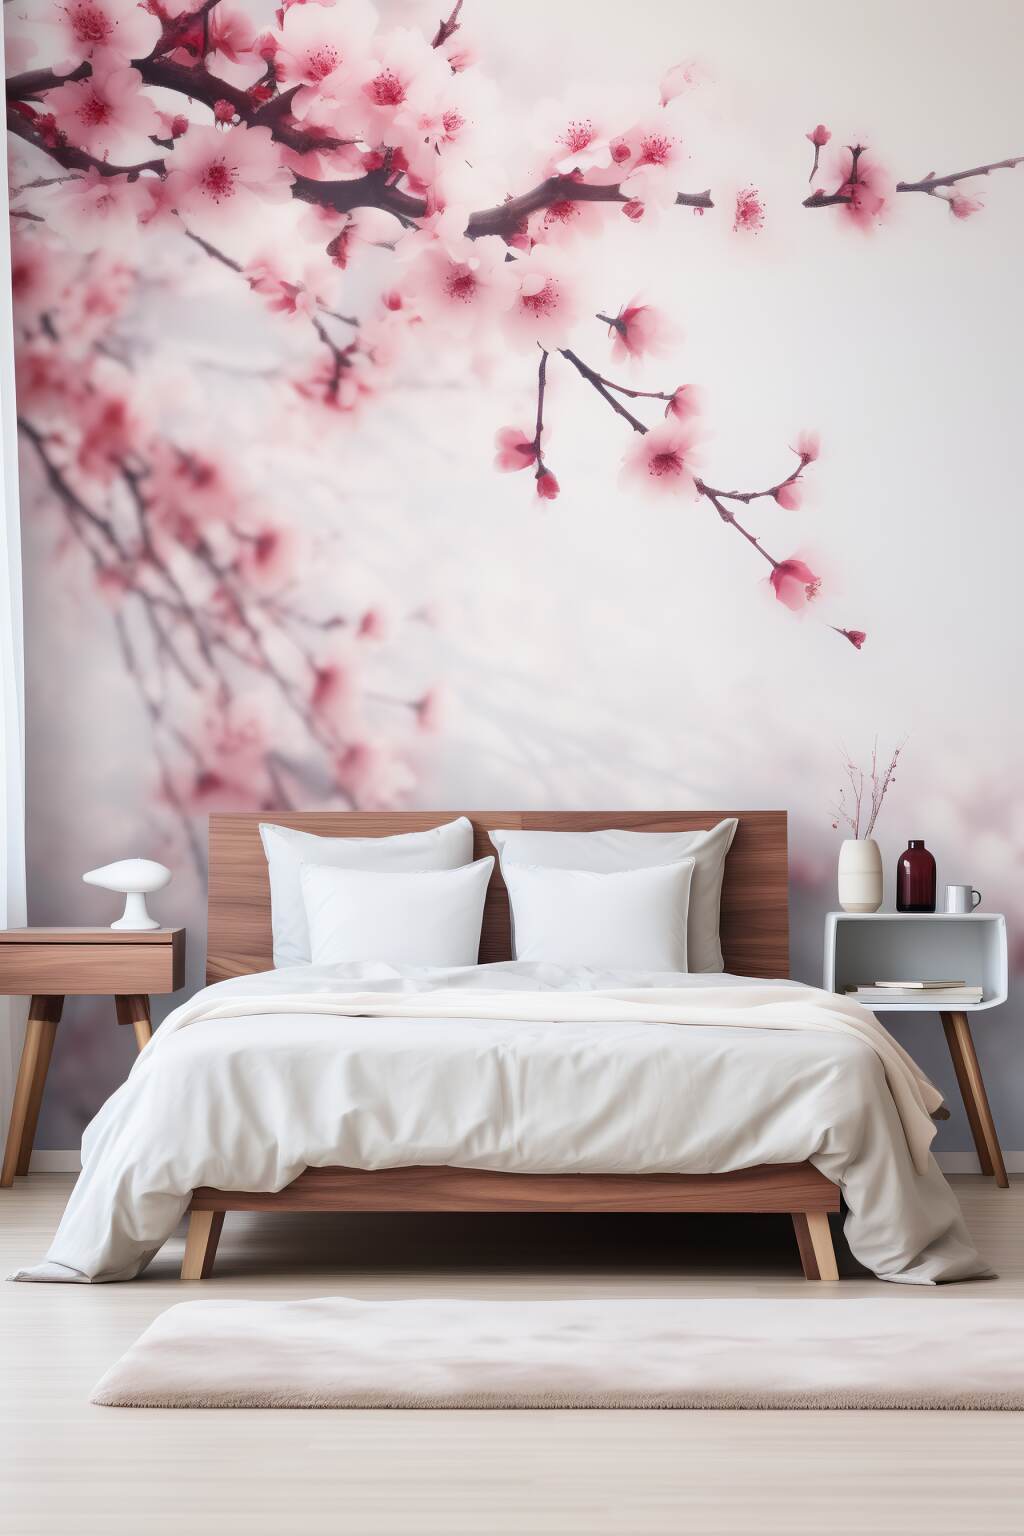 Bedroom Decorated With A Cherry Blossom Wall Mural